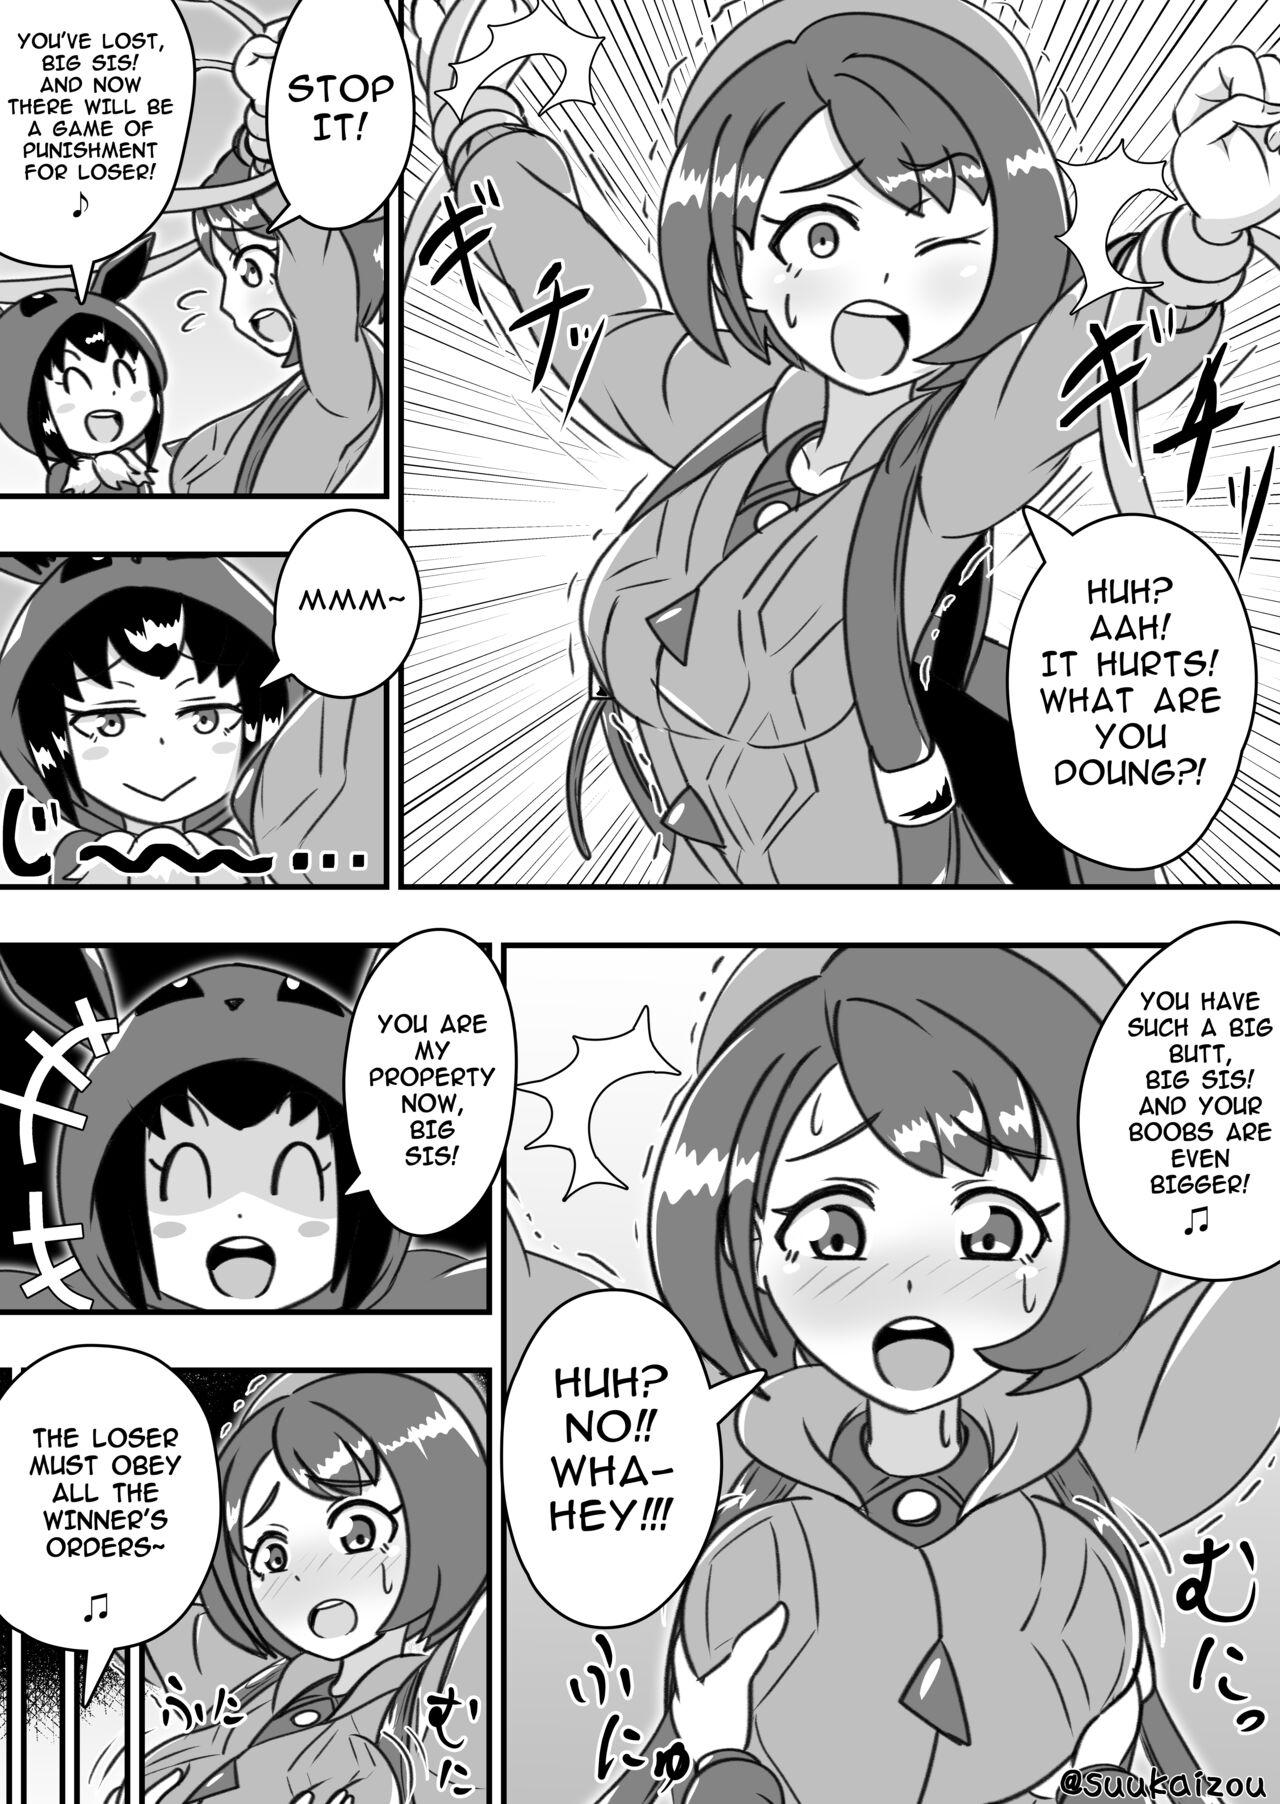 Small Tits Yuri-chan, Pokemon pretend to be naked and take a walk with a nipple lead - Pokemon | pocket monsters Gay - Page 3